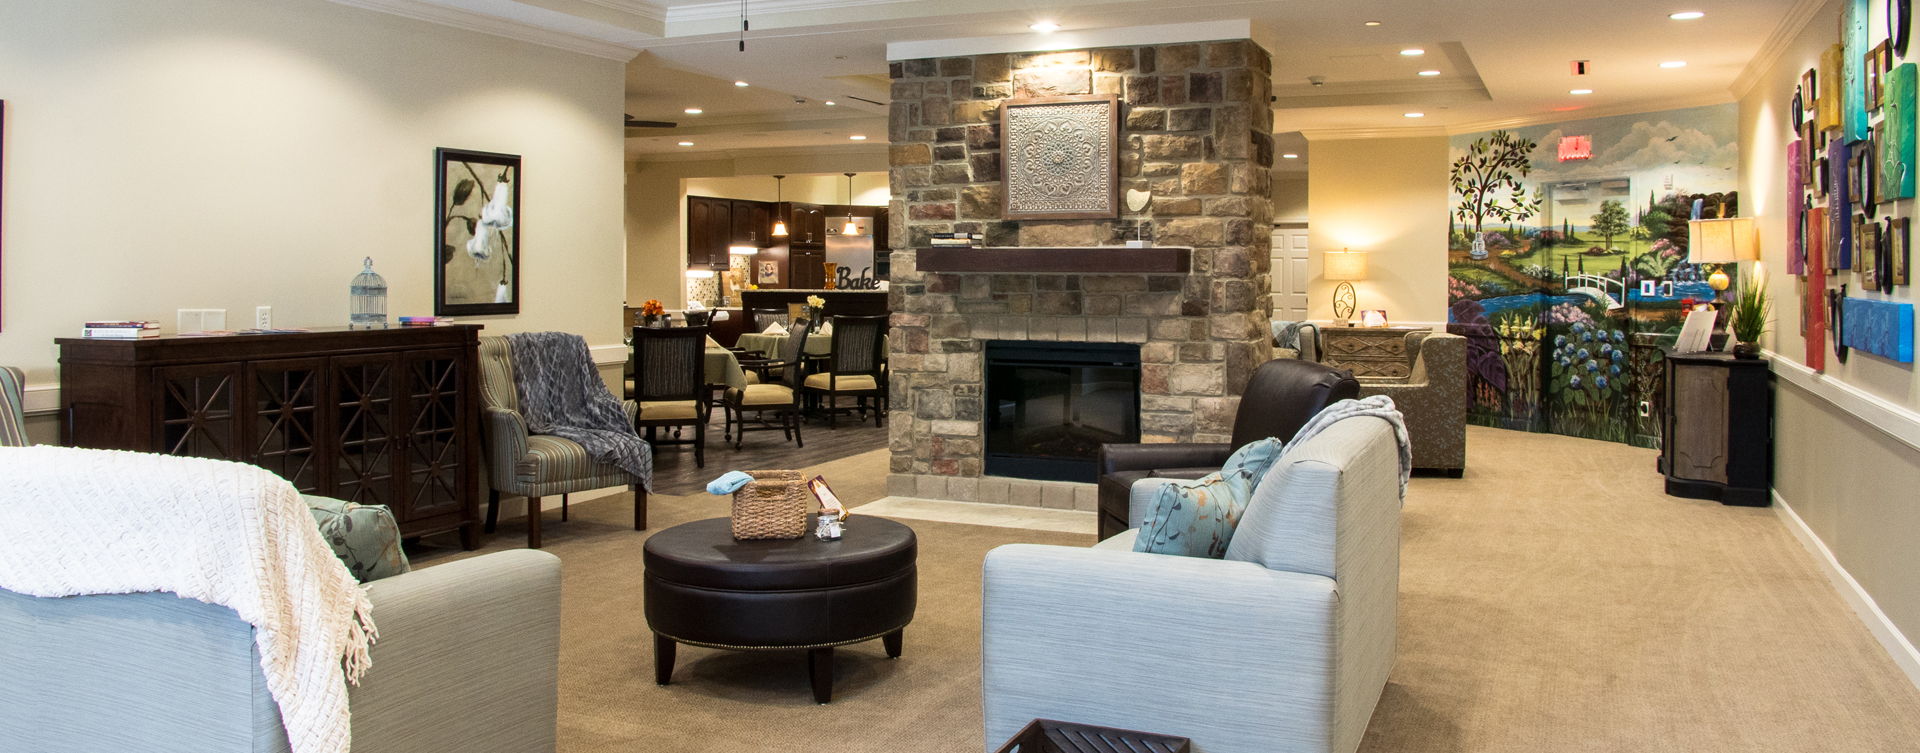 Residents can enjoy furniture covered in cozy fabrics in the Mary B’s living room at Bickford of Chesterfield